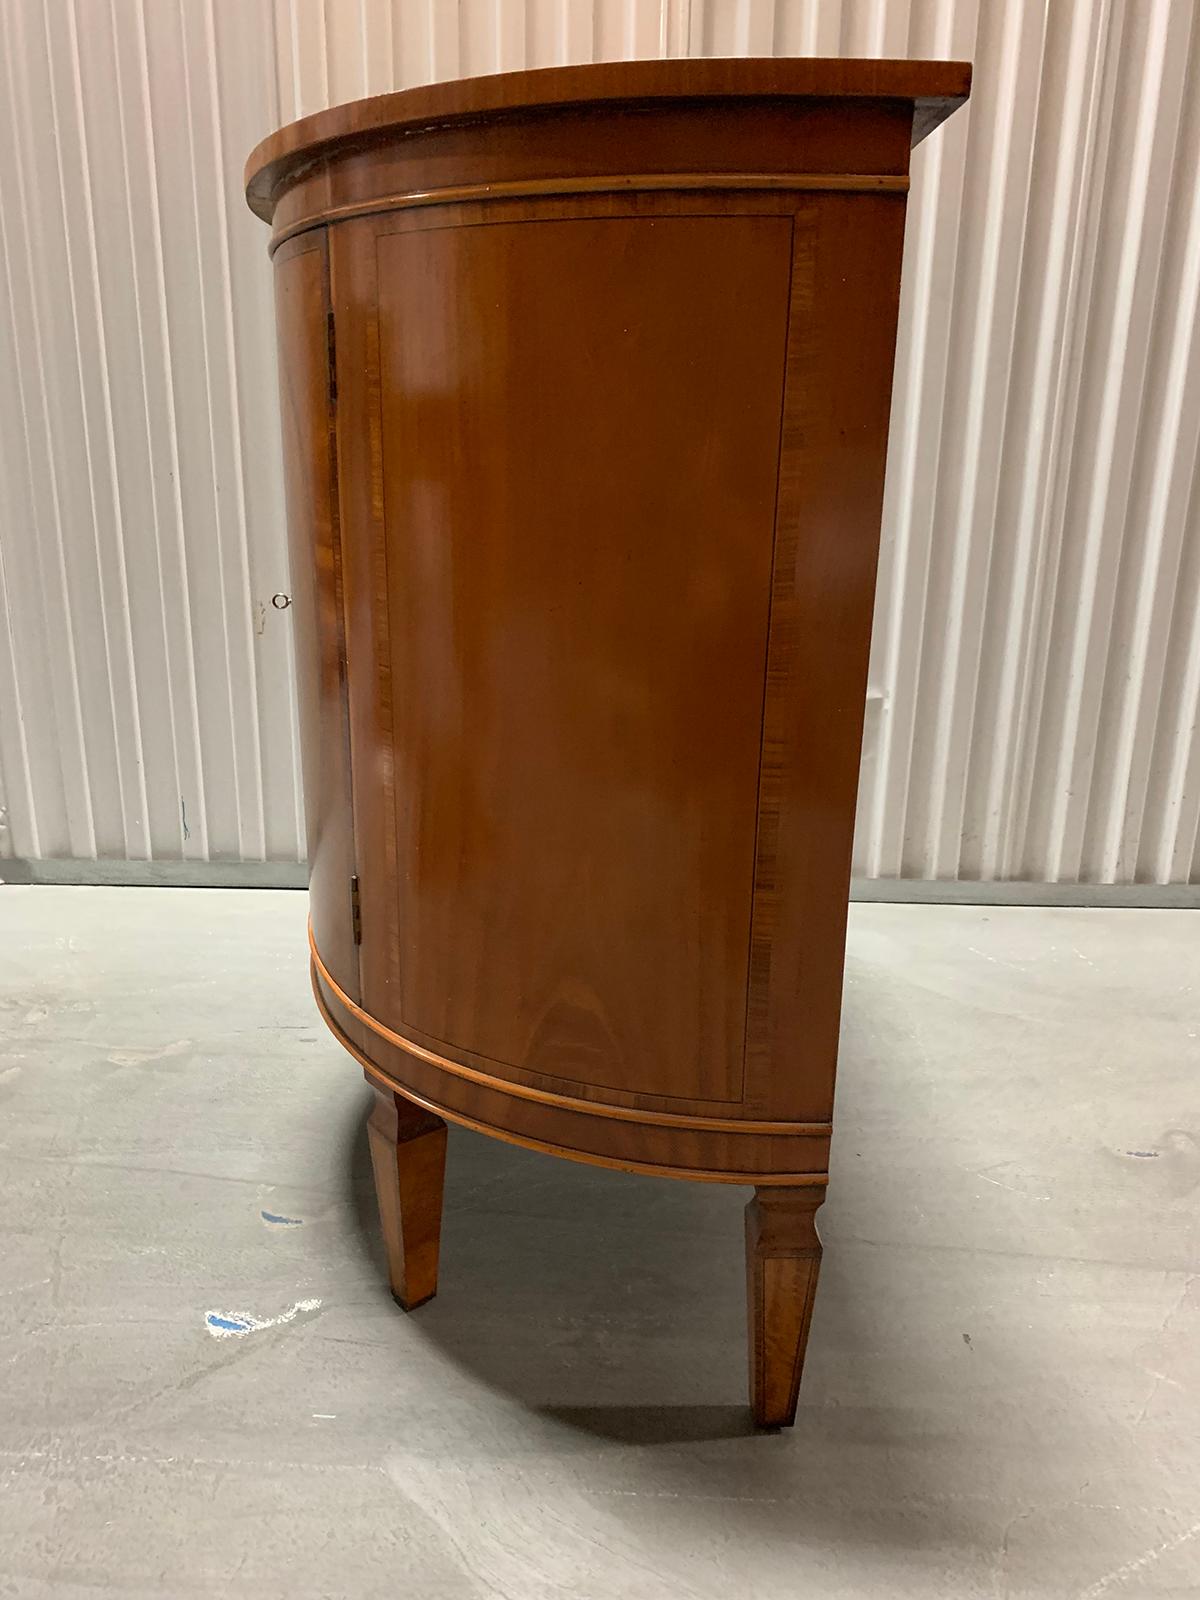 20th Century Yew Wood Demilune Cabinet with Banding Inlay In Good Condition For Sale In Atlanta, GA